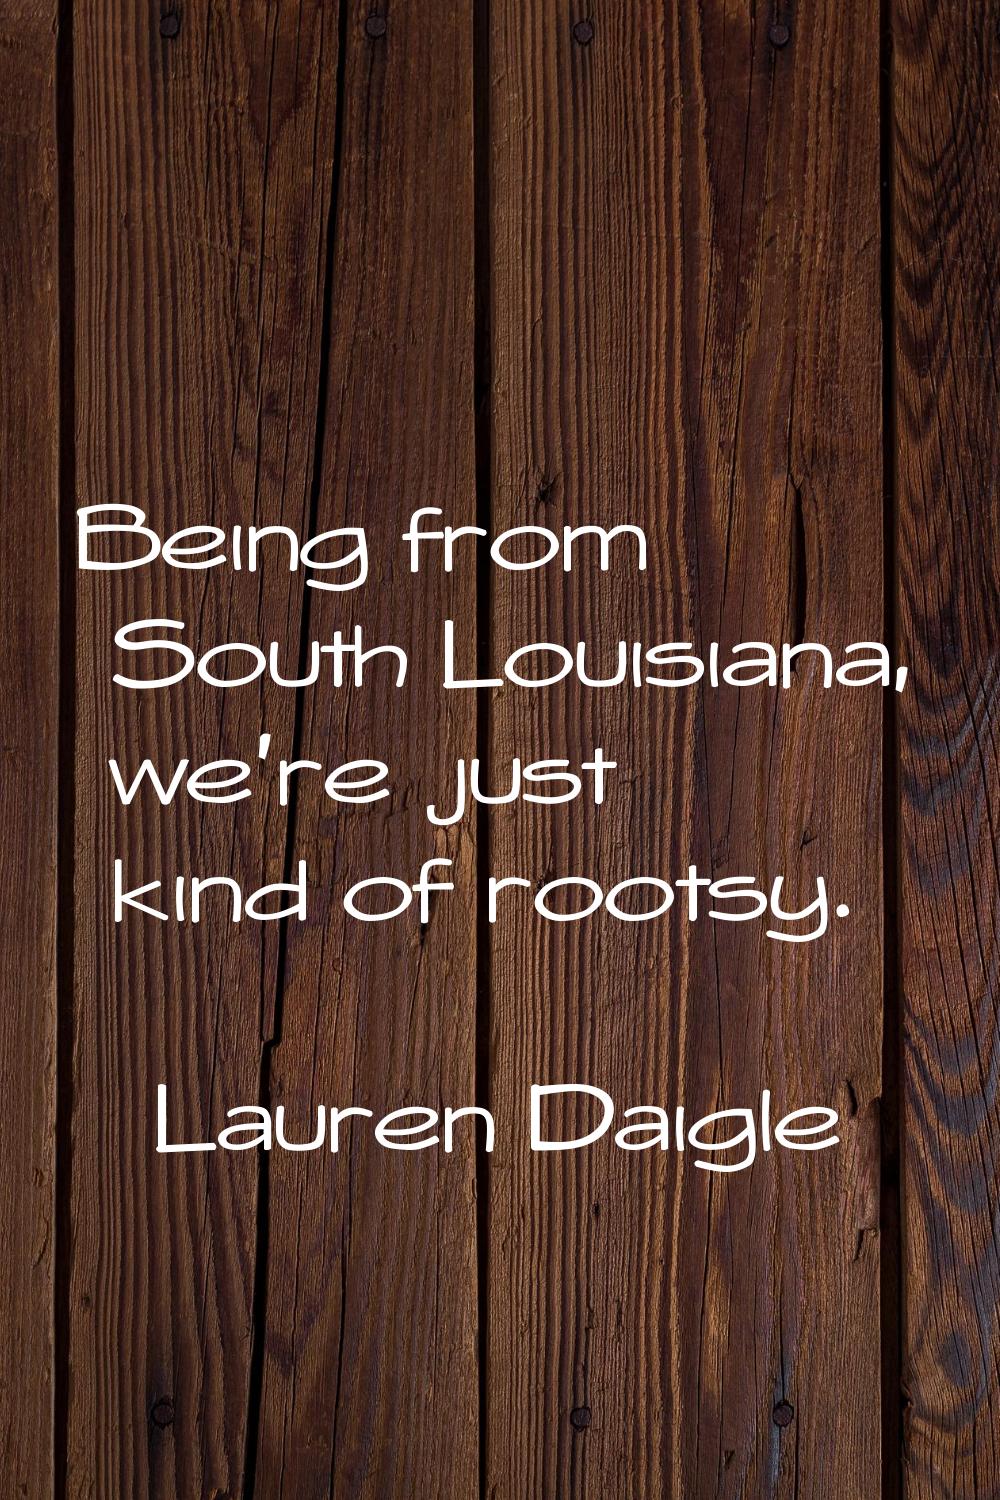 Being from South Louisiana, we're just kind of rootsy.